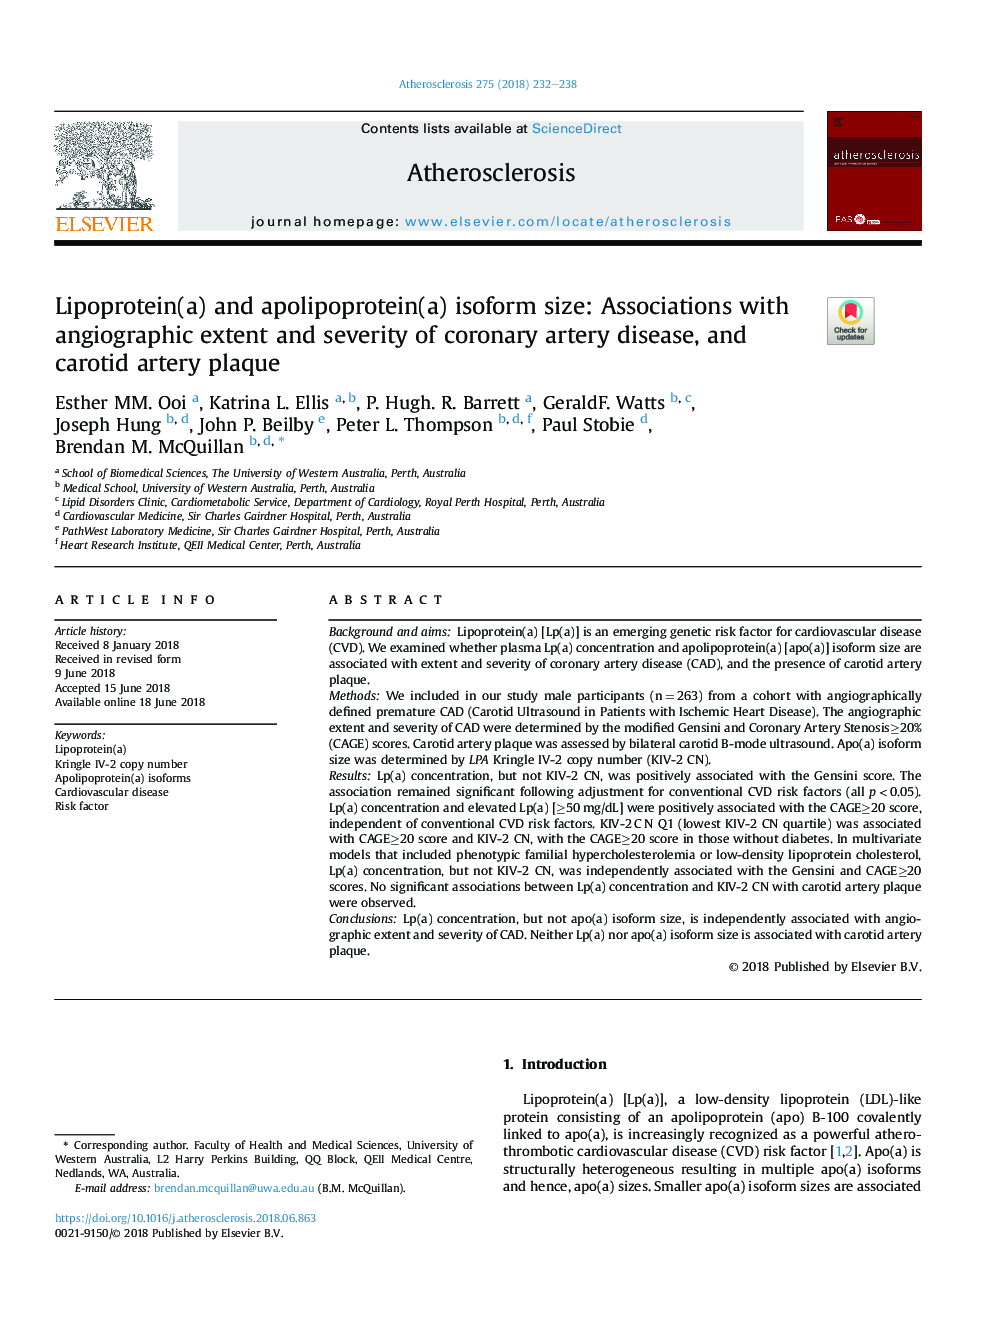 Lipoprotein(a) and apolipoprotein(a) isoform size: Associations with angiographic extent and severity of coronary artery disease, and carotid artery plaque